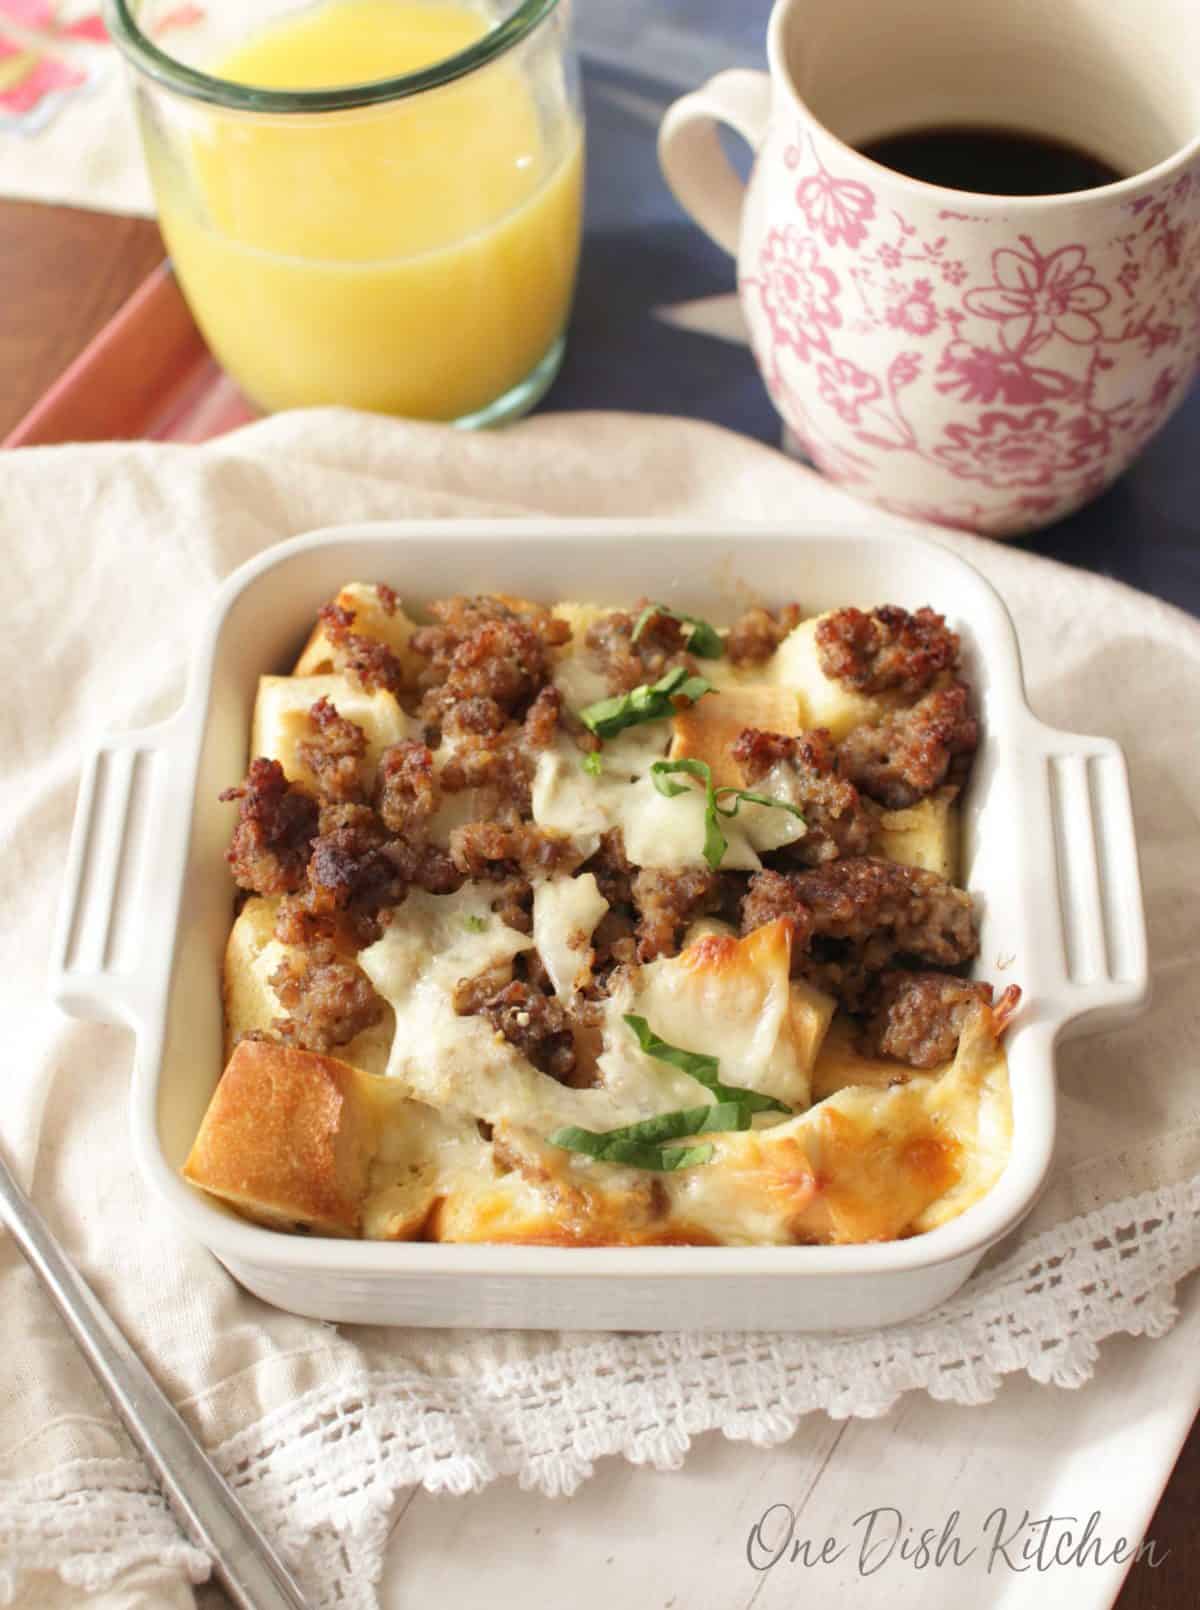 Breakfast casserole in a small baking dish next to a glass of orange juice and a coffee mug.